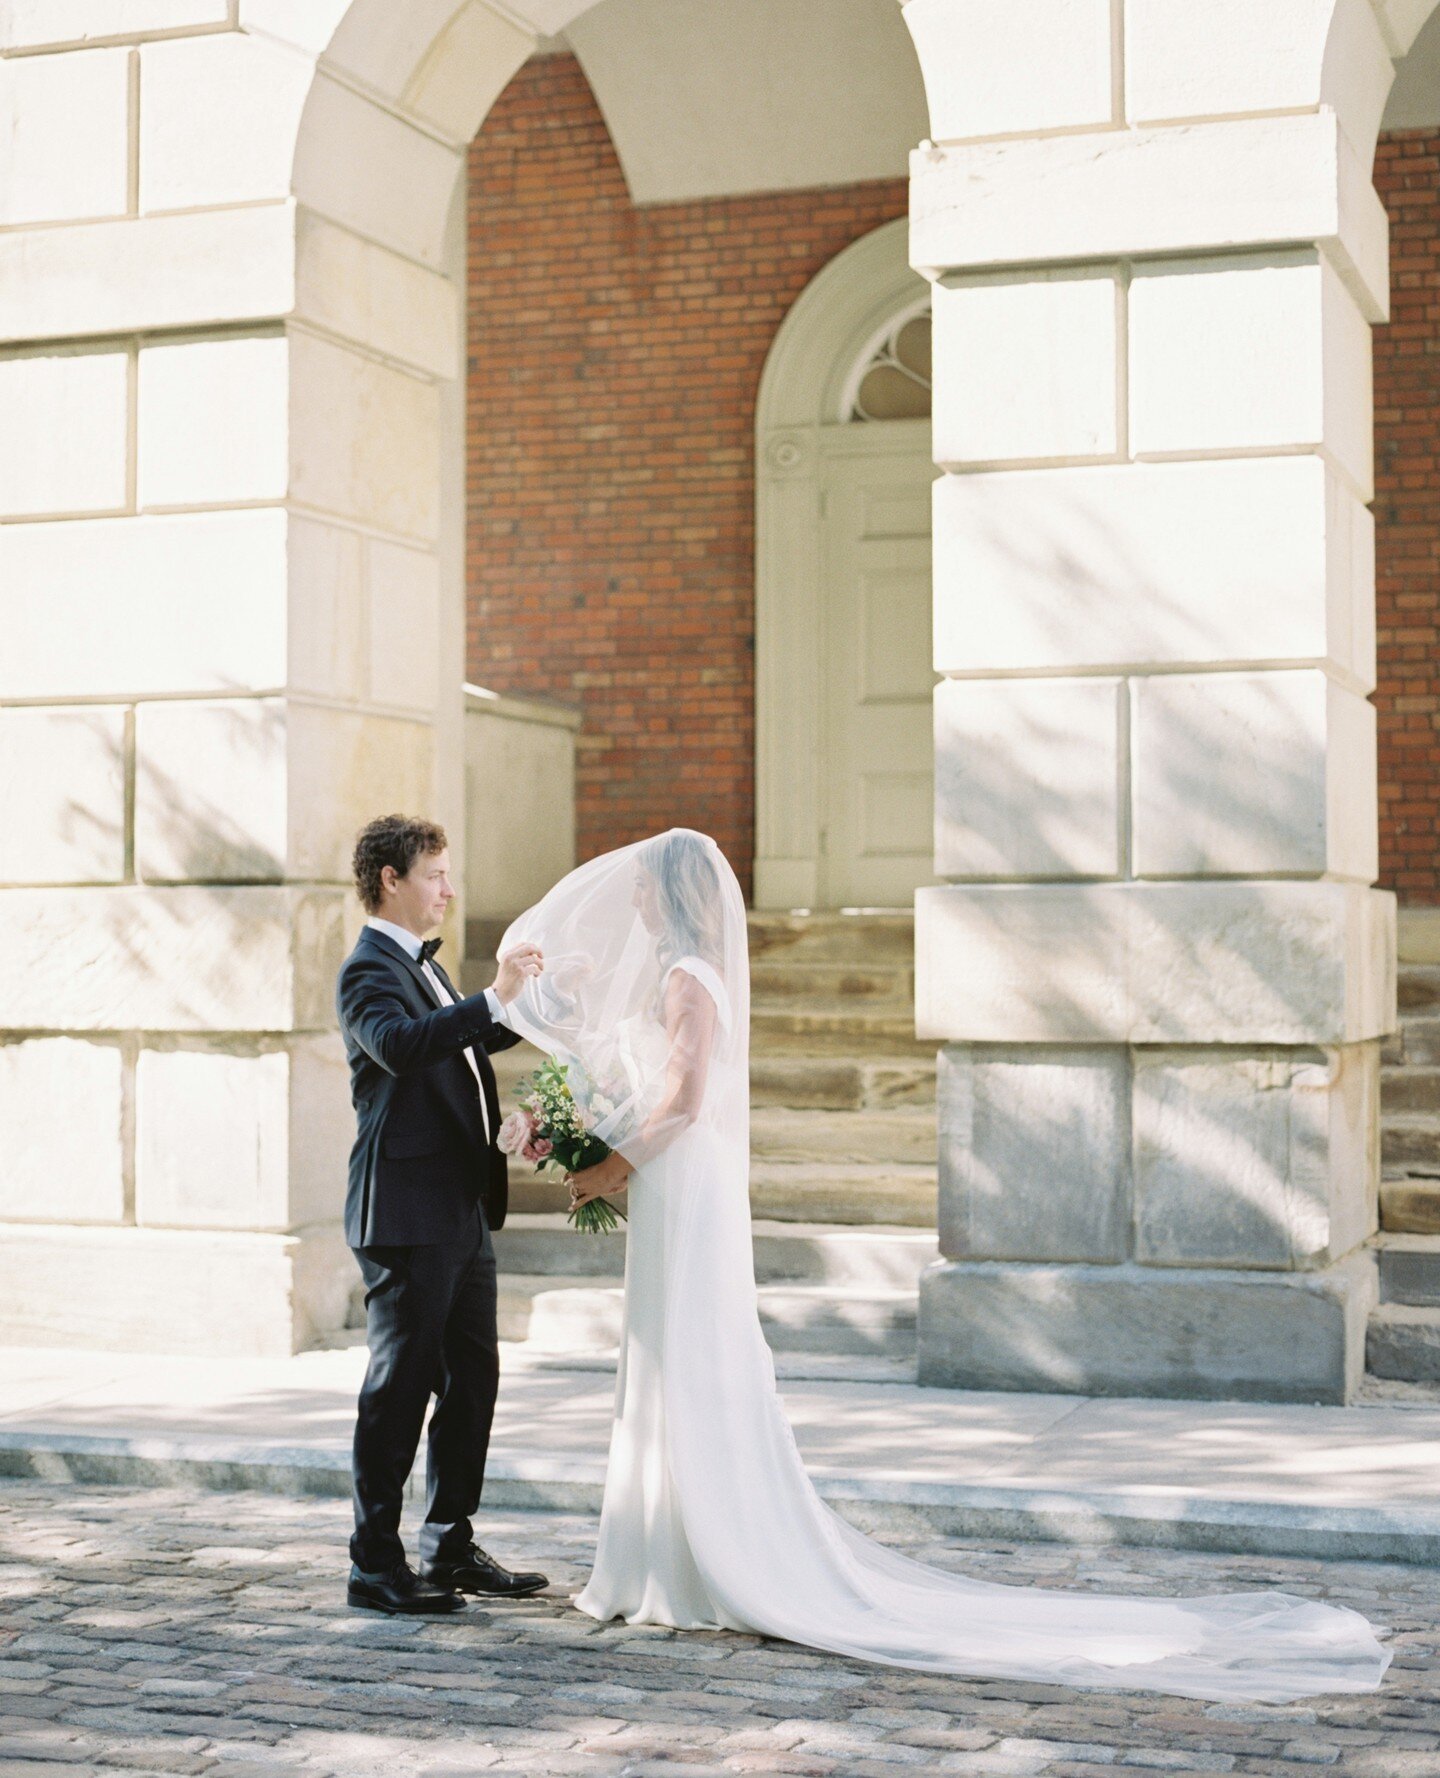 Are you planning on doing a first look? I love doing first looks as it gives you and your person a private moment before your ceremony to get a few of those jitters out. Some couples like to do a private vow exchange before as well, which is always s